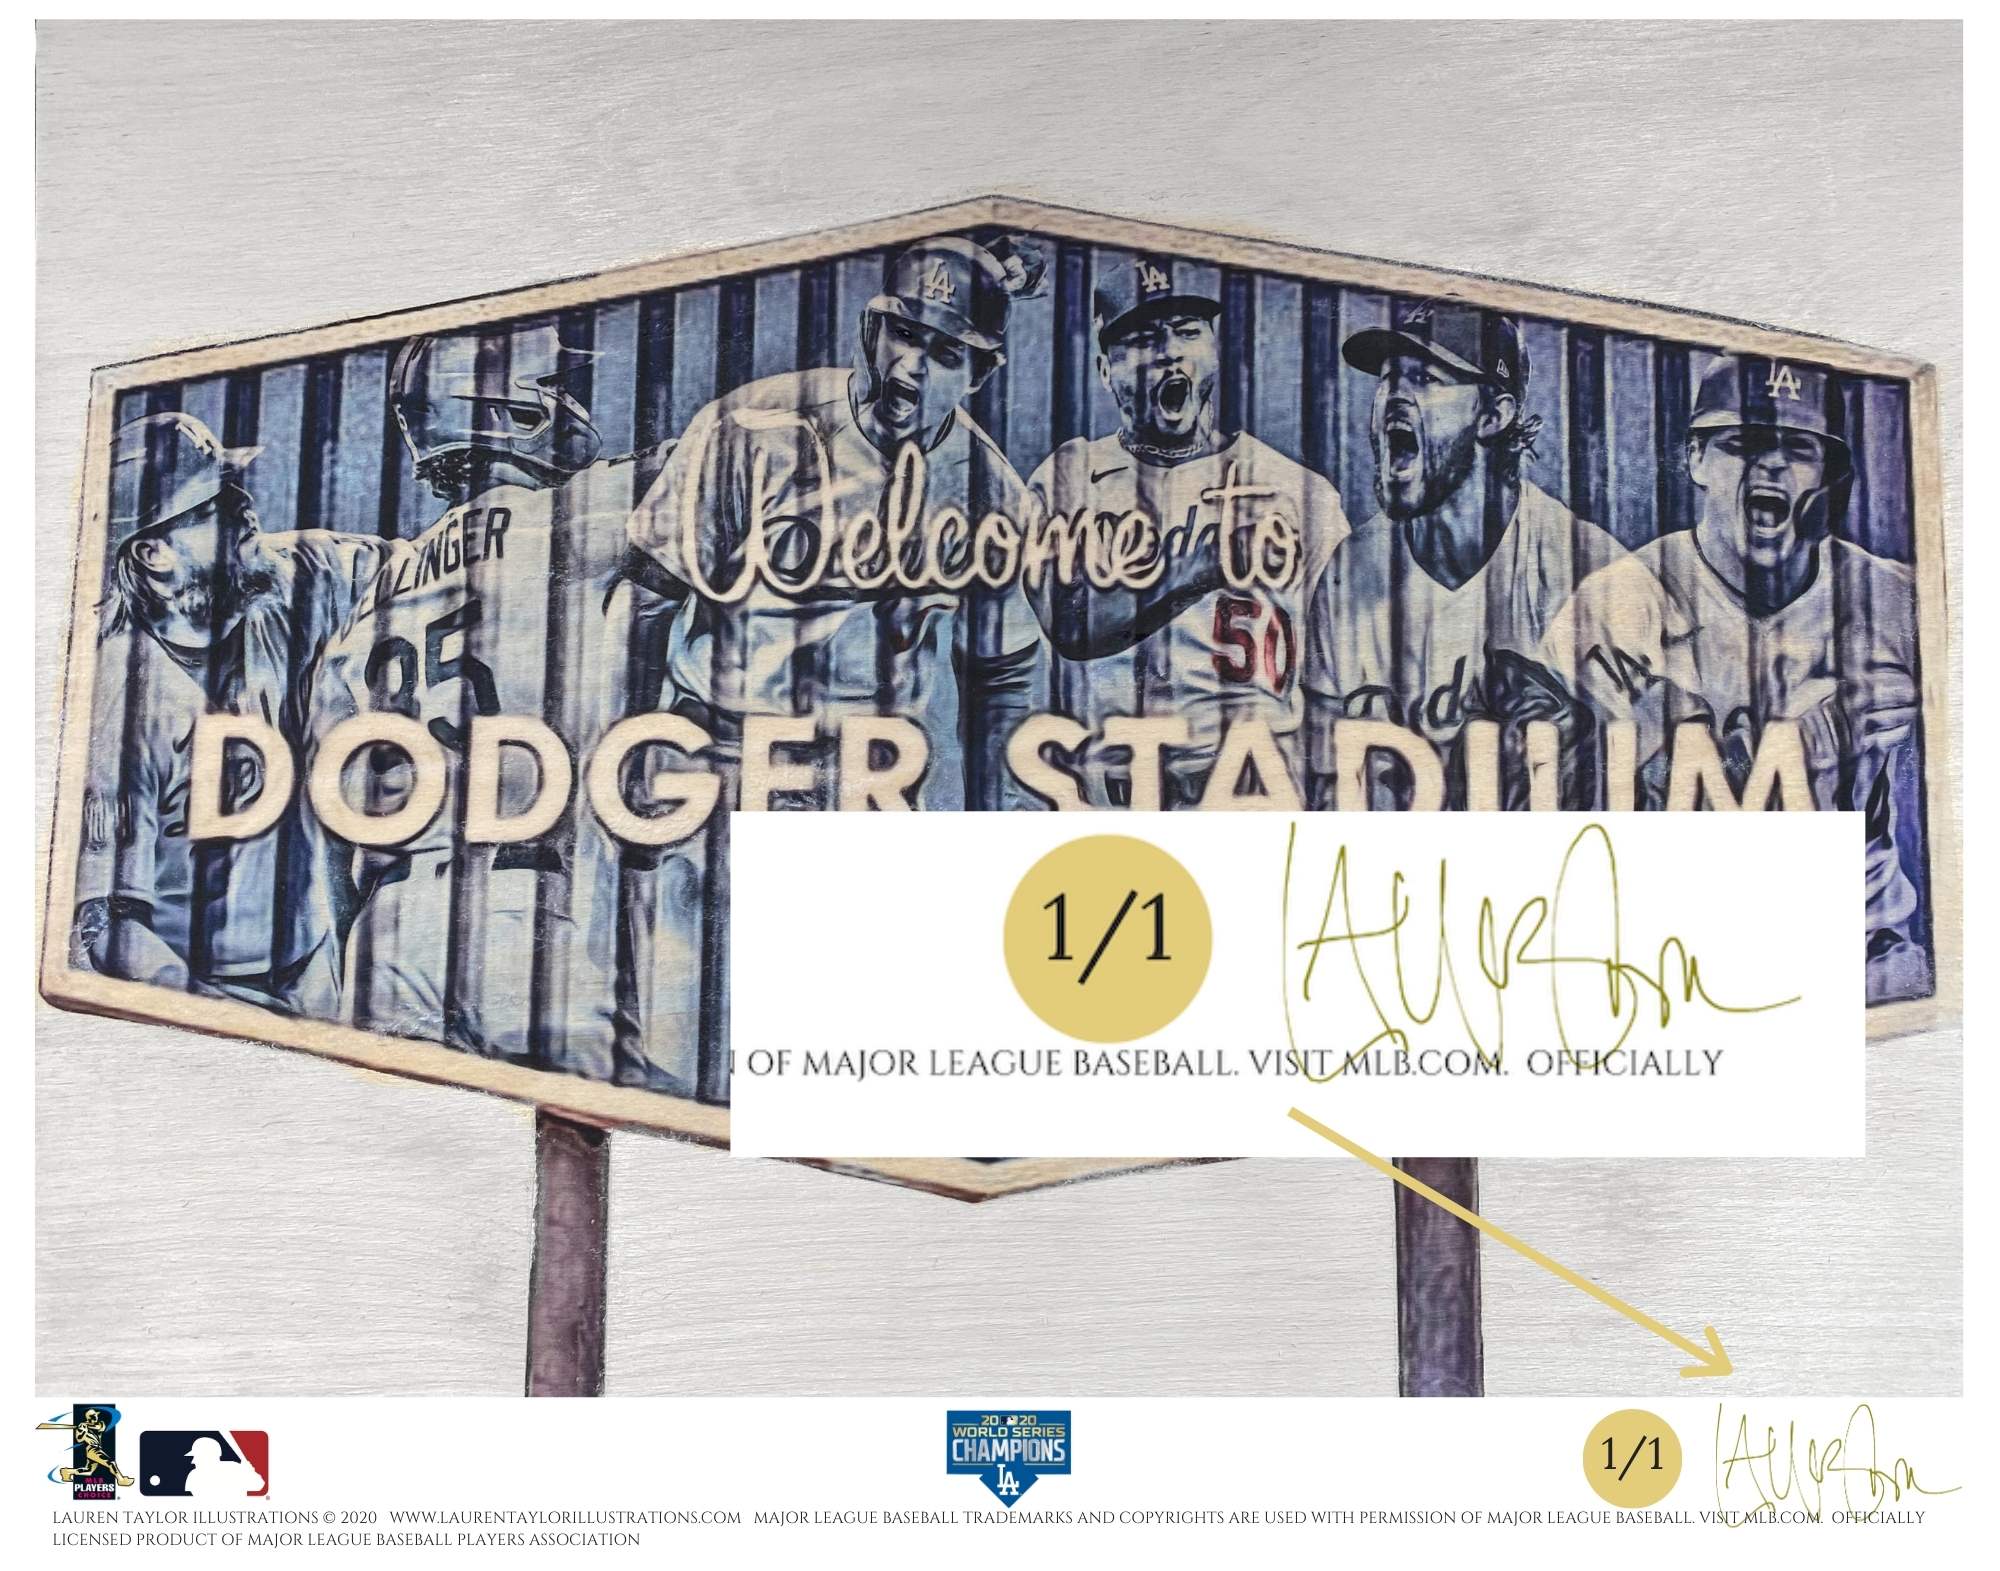 "Dodger Blue" (Los Angeles Dodgers) 2020 World Series Champions - Officially Licensed MLB Print - Commemorative GOLD SIGNATURE Limited Release /1